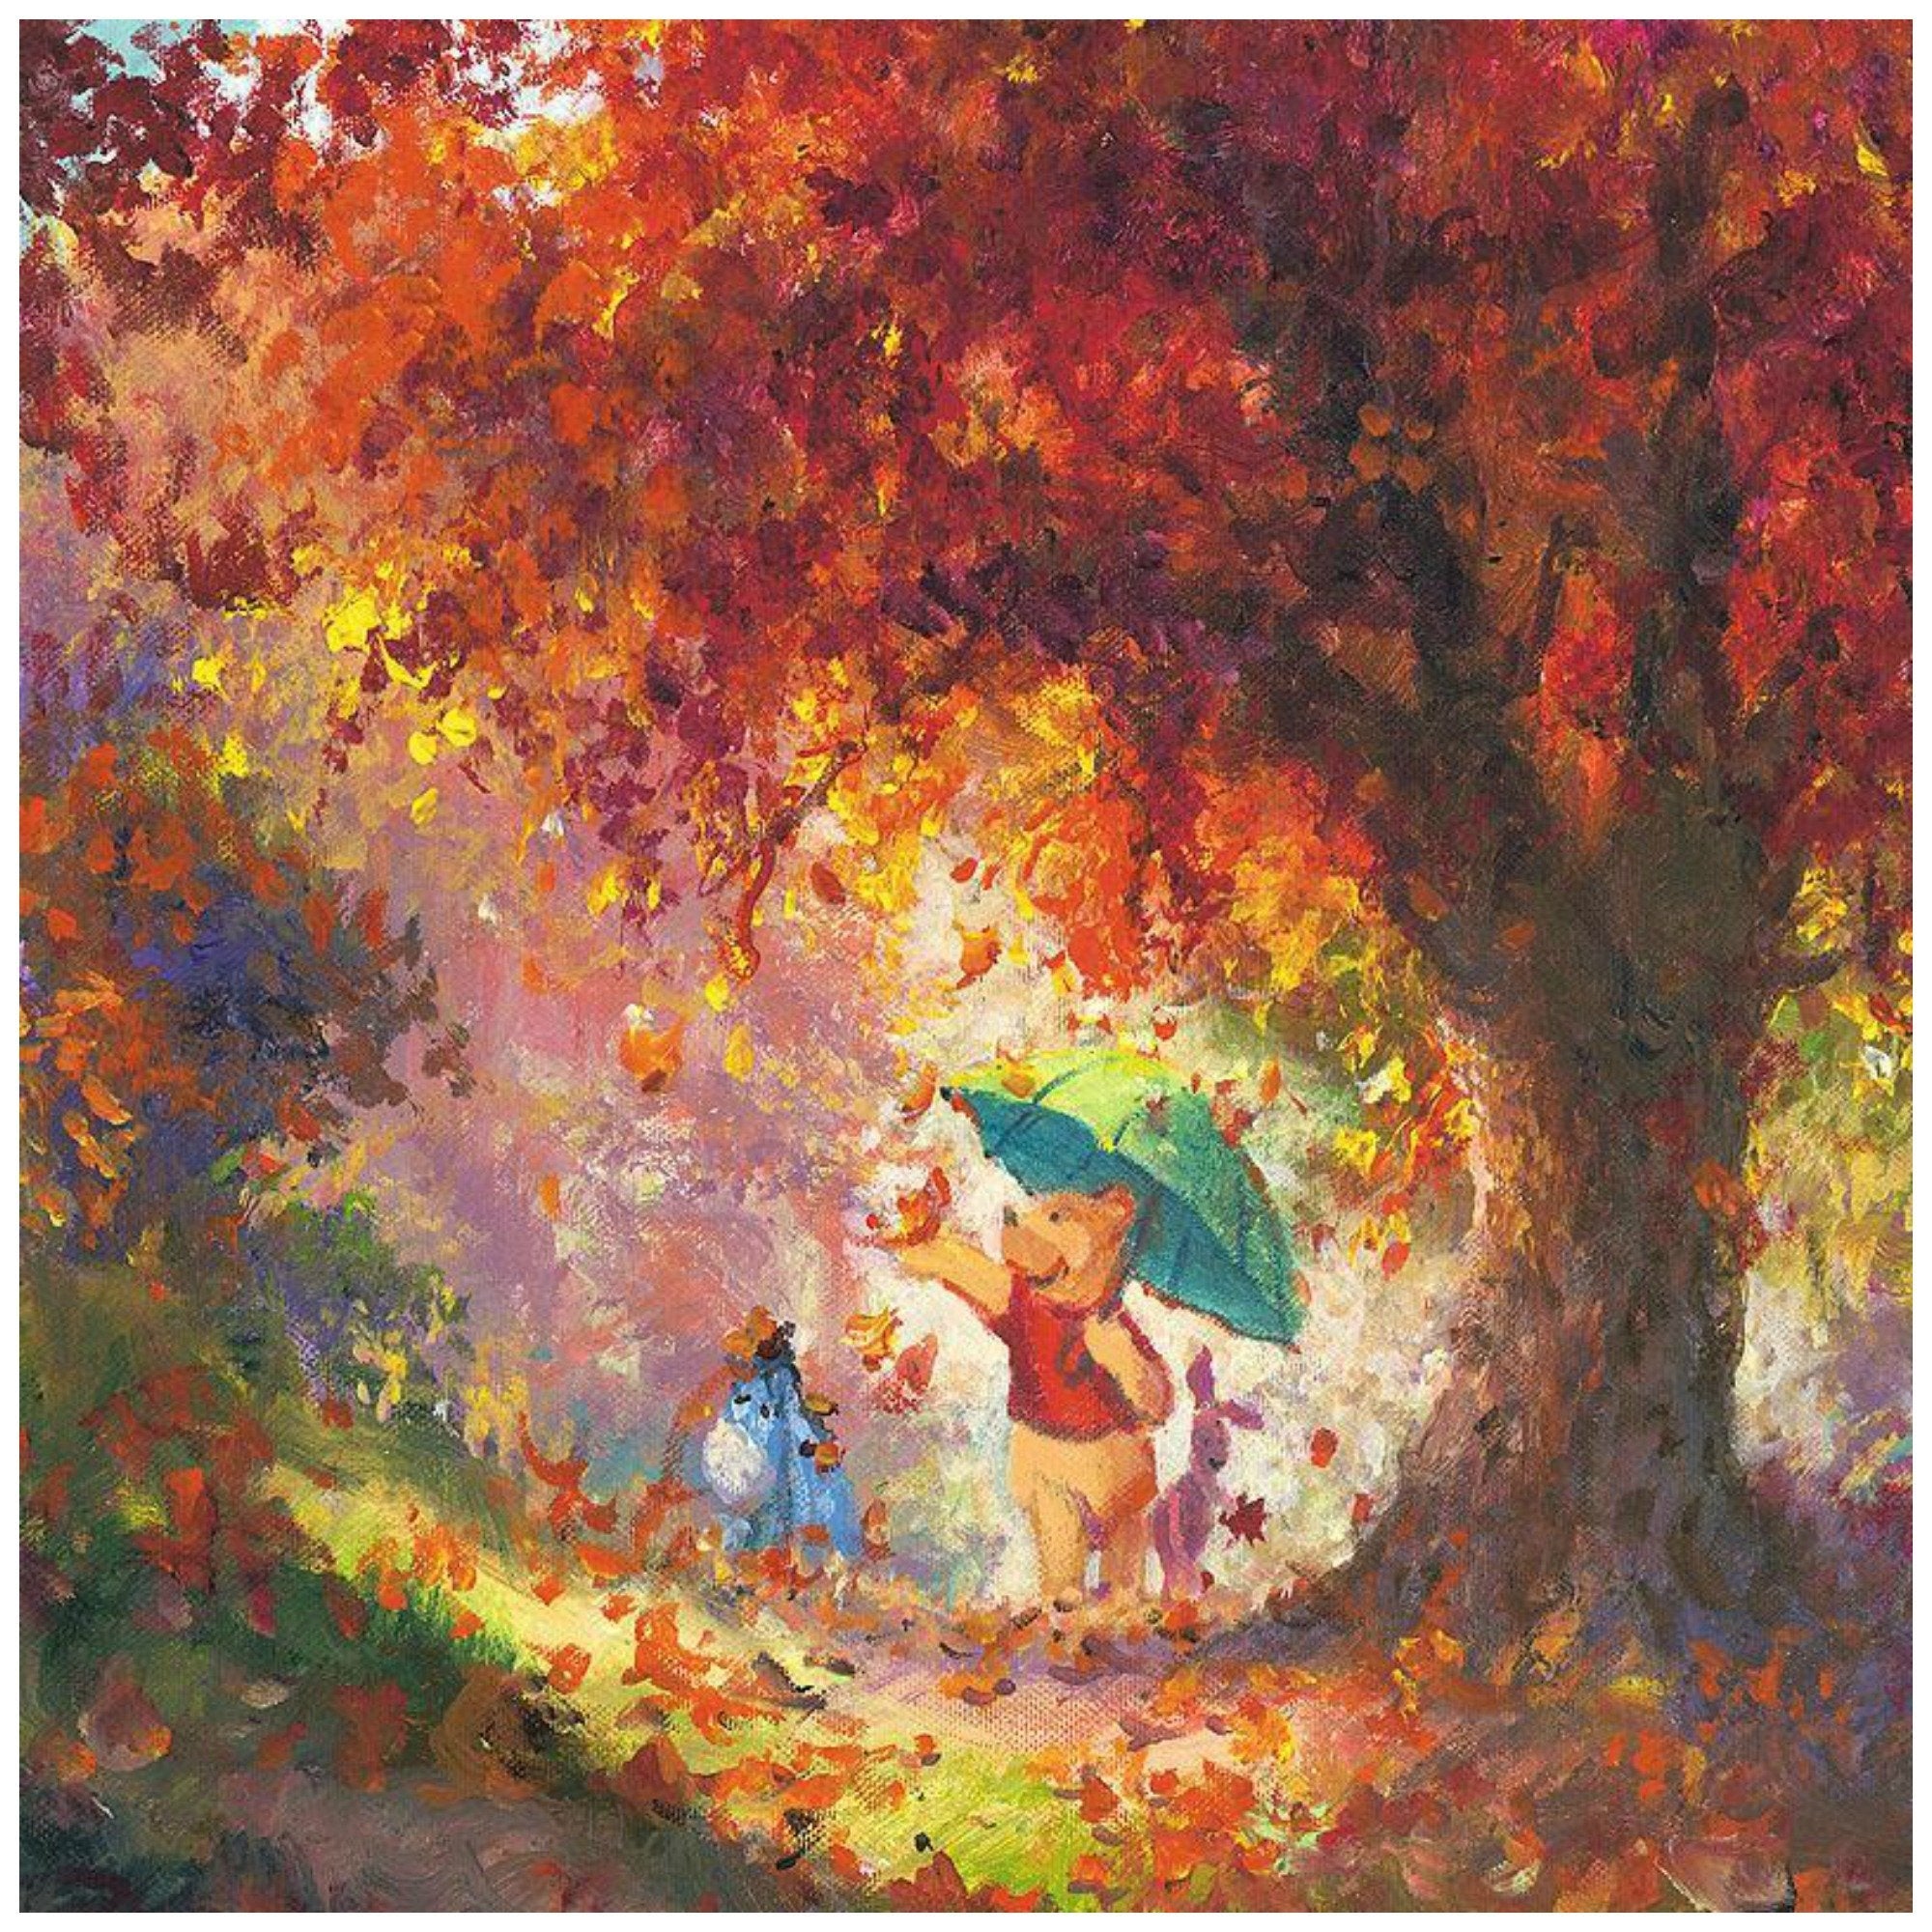  Autumn Leaves Gently Falling by James Coleman  Winnie the Pooh holding a green umbrella, to keep the fall leaving from falling on him - closeup